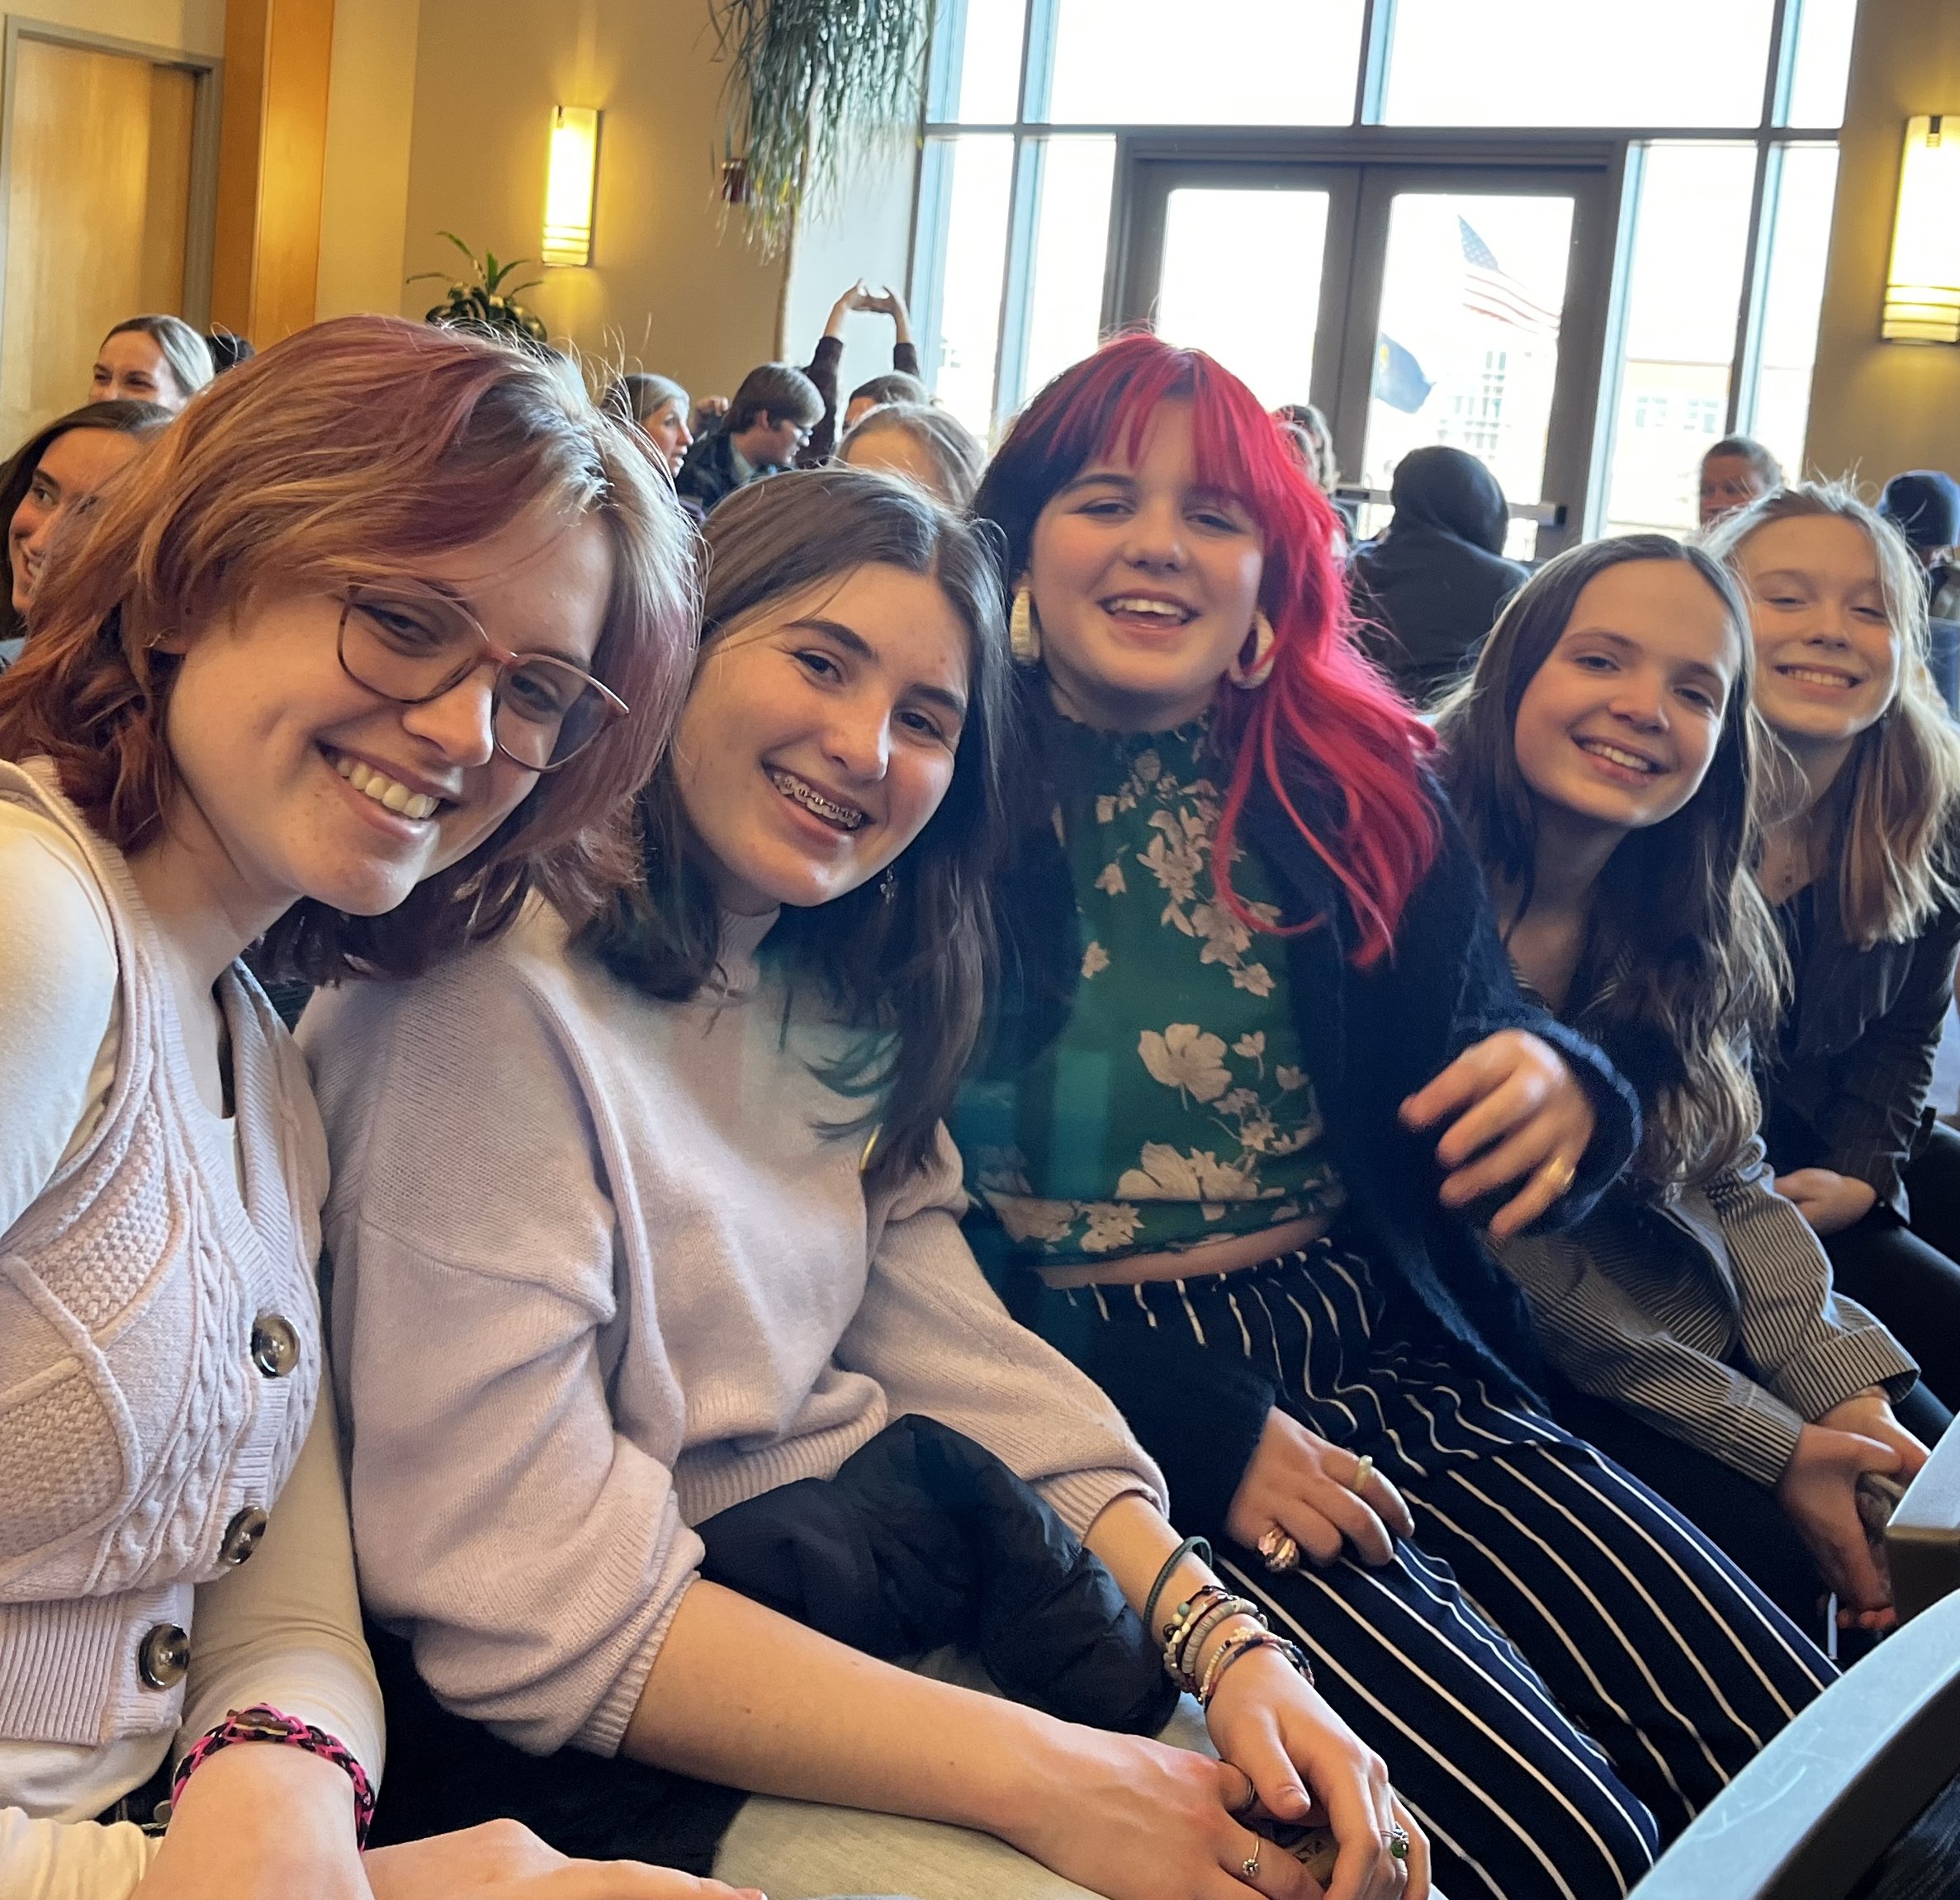   At the competition. Harwood Middle School students Eireann McDonough, Maisy Gendimenico, Lily Adair, Jane Schaefer and Emma Aither. Photo by Sarah Ibson  